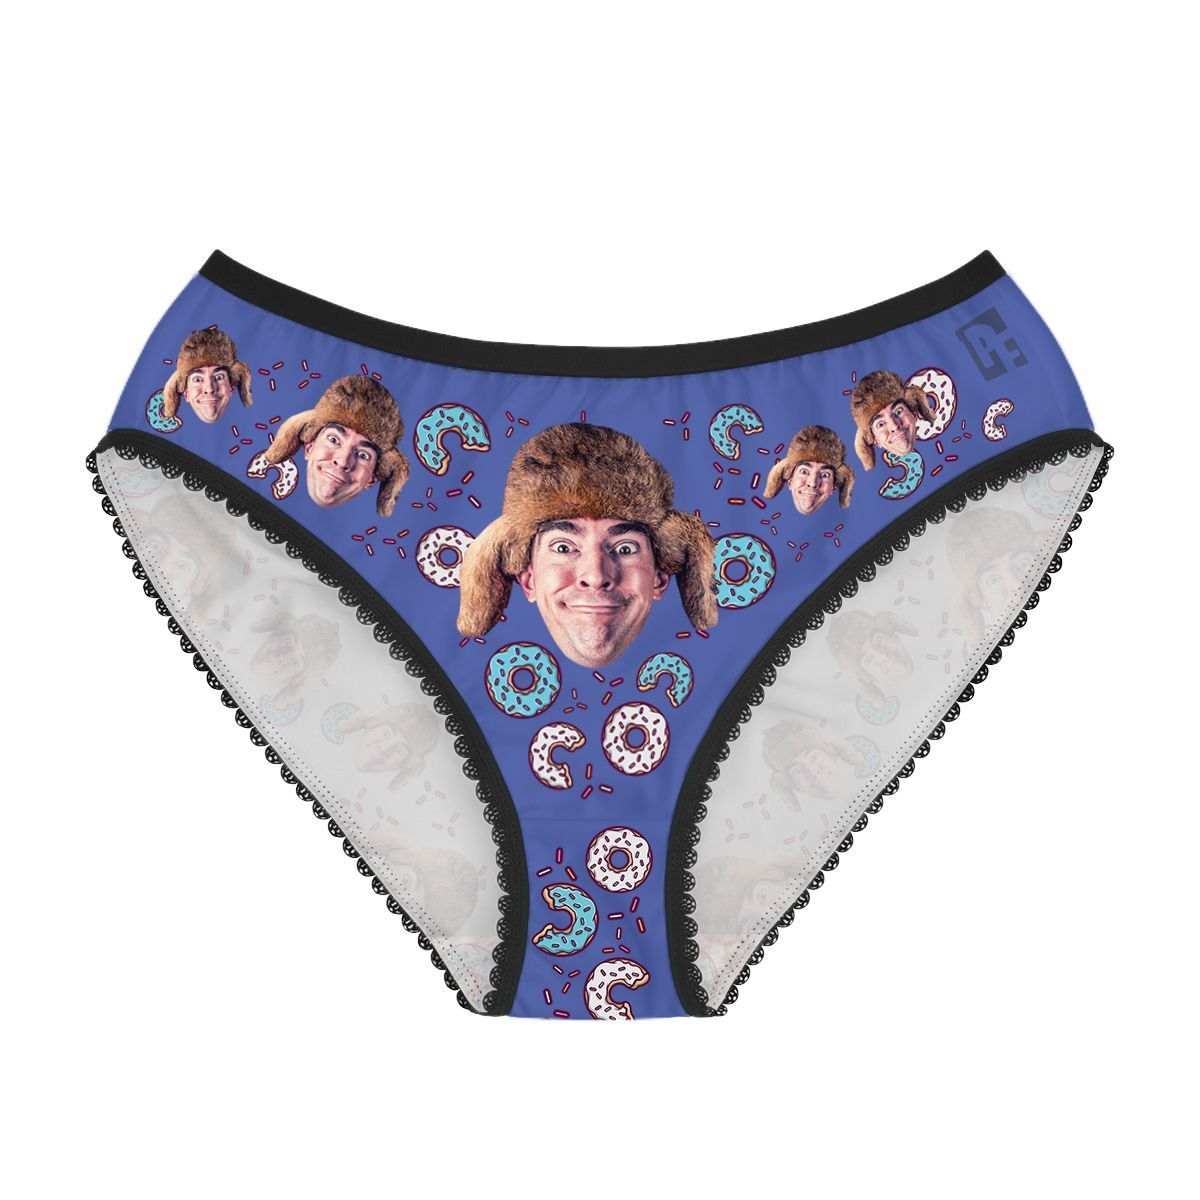 Darkblue Donuts women's underwear briefs personalized with photo printed on them